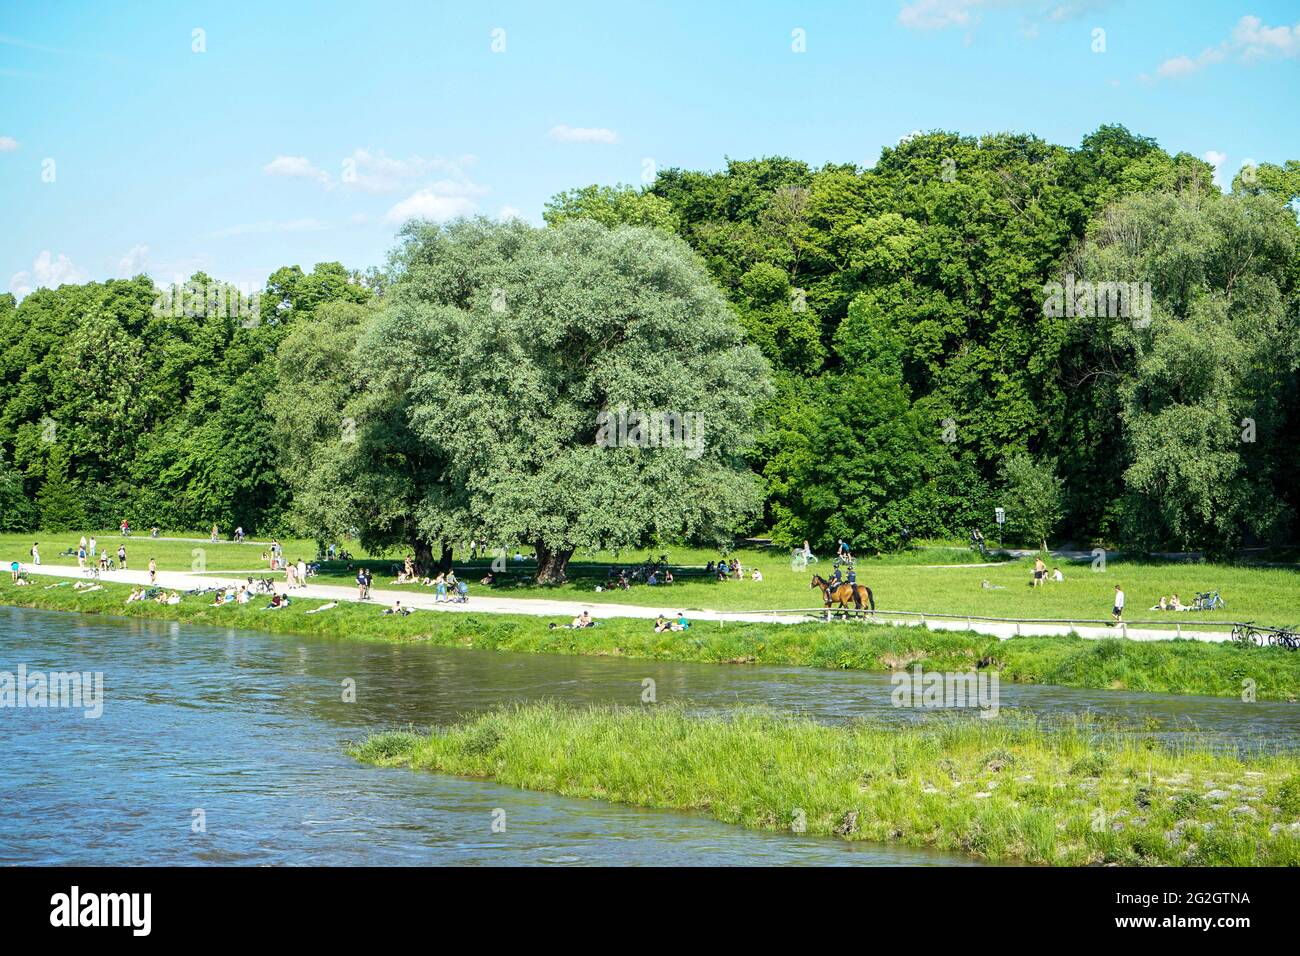 People enjoy life on a warm summer day on the banks of the river Isar in Munich after the strict Corona restrictions. Mounted police patrol the beach. Stock Photo